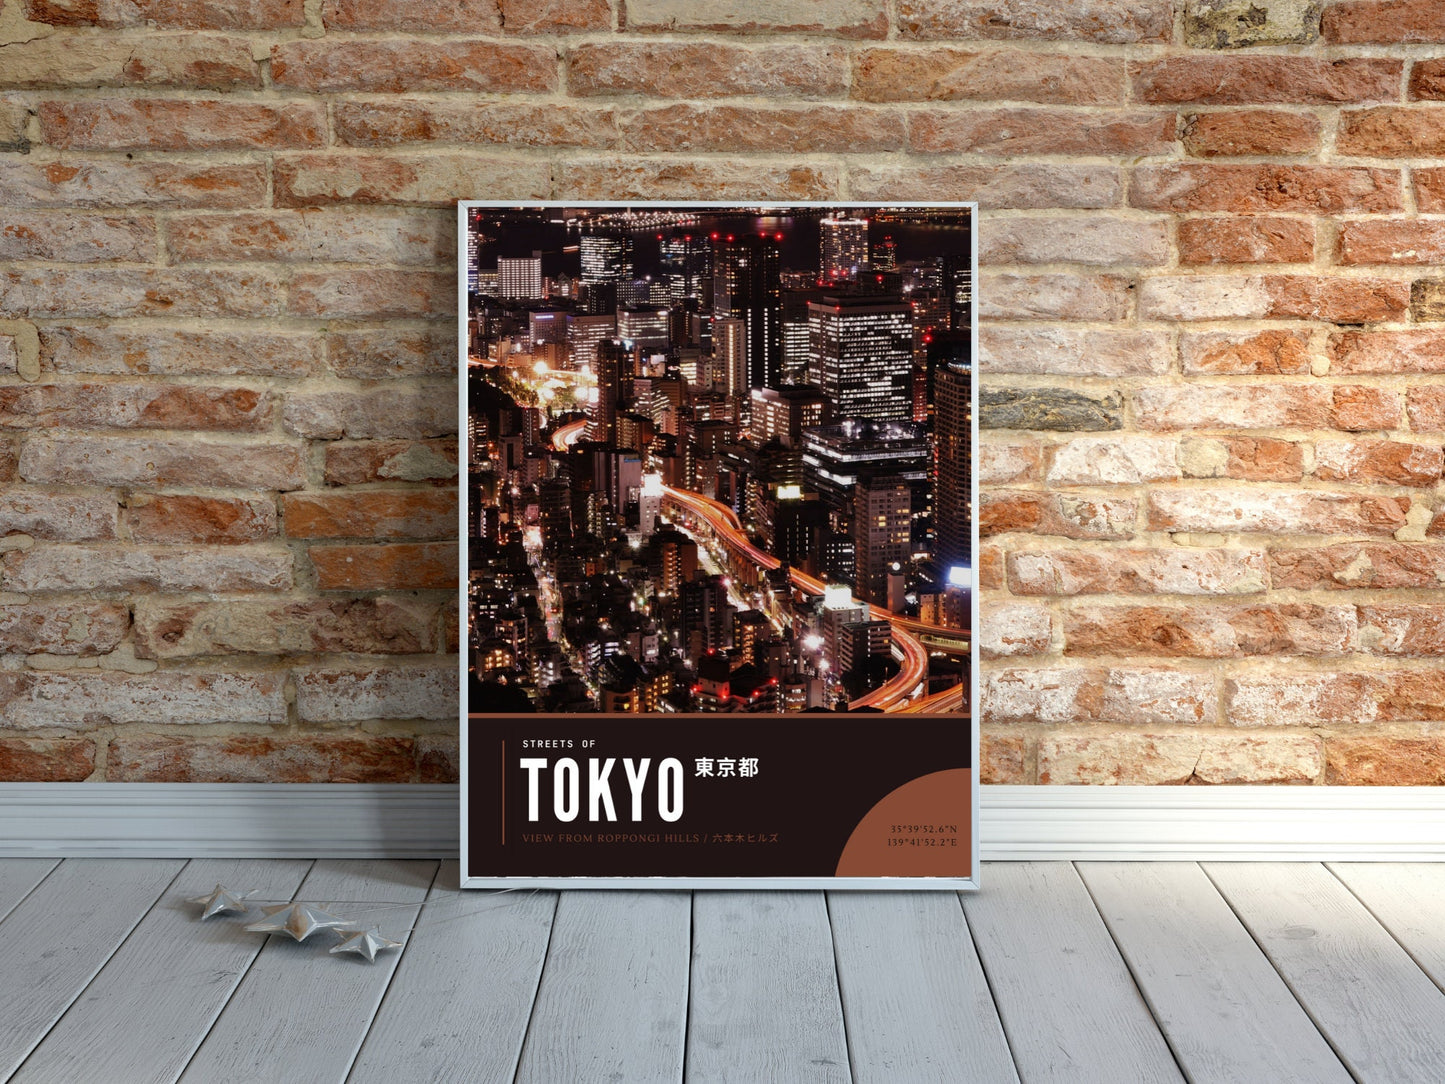 Tokyo Skyline Night Photography Poster, Streets of Tokyo Series